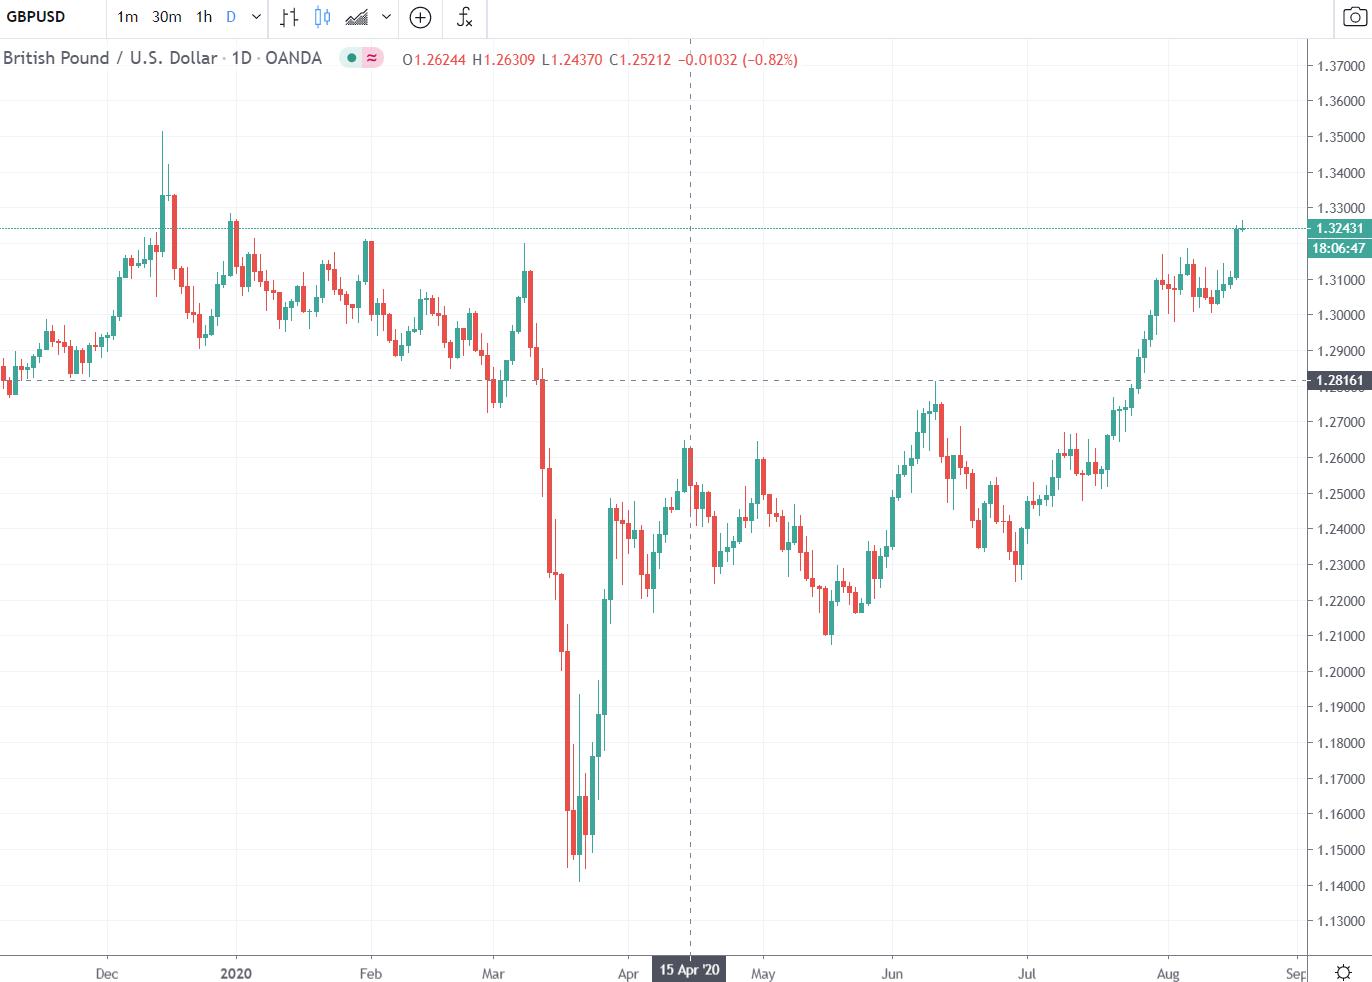 ForexLive Asia FX news wrap: Cable hits a 2020 high 